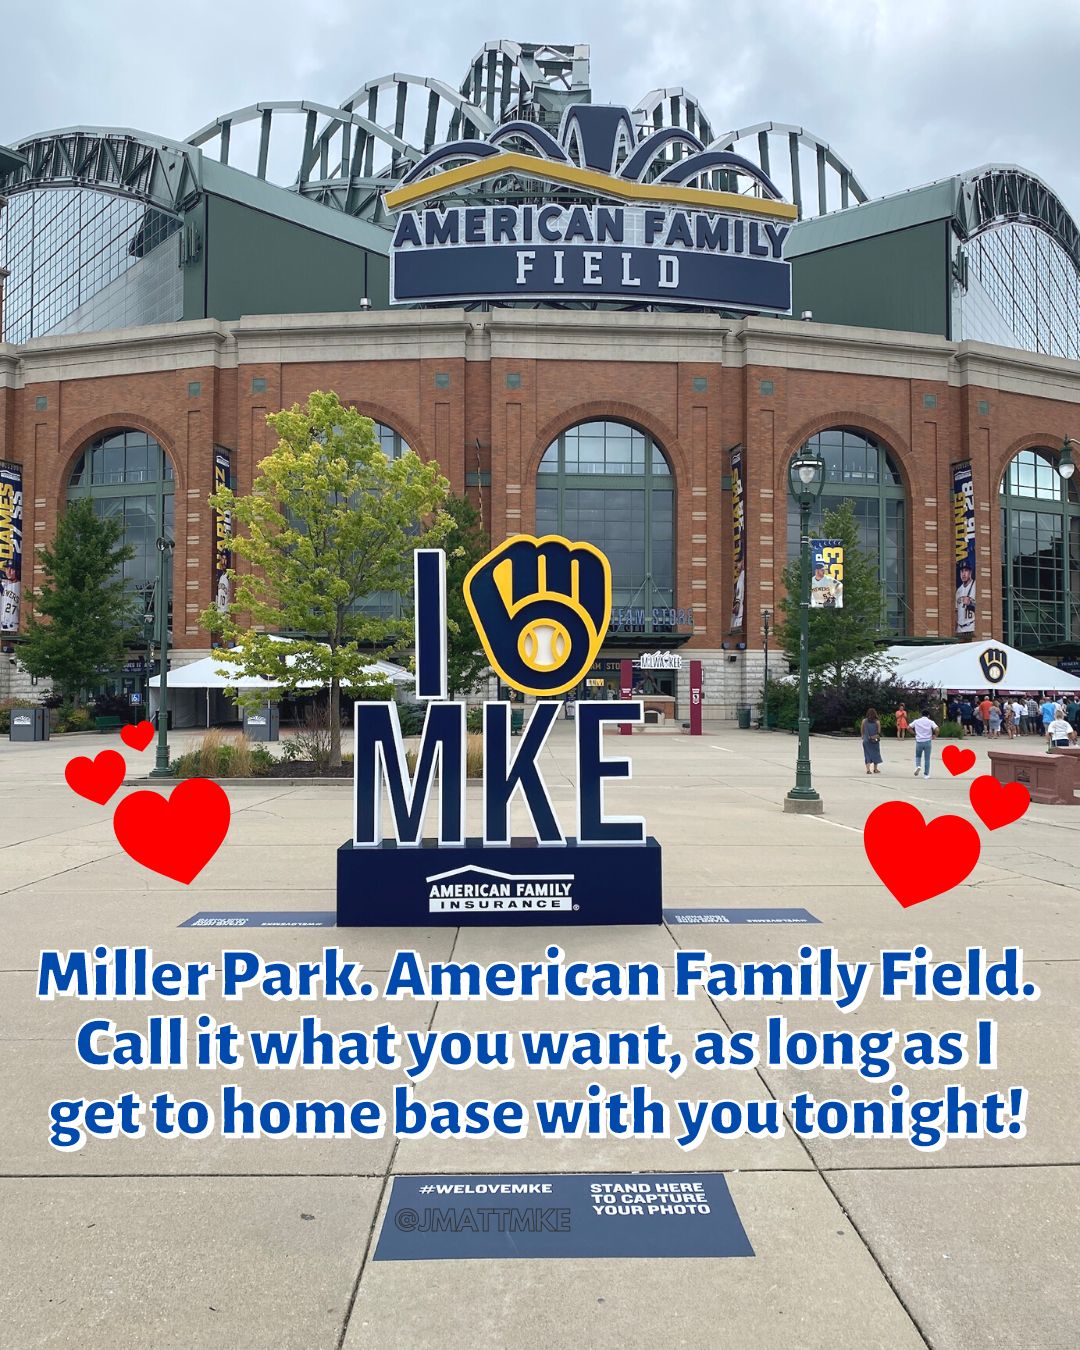 “Miller Park. American Family Field. Call it what you want, as long as I get to home base with you tonight!”